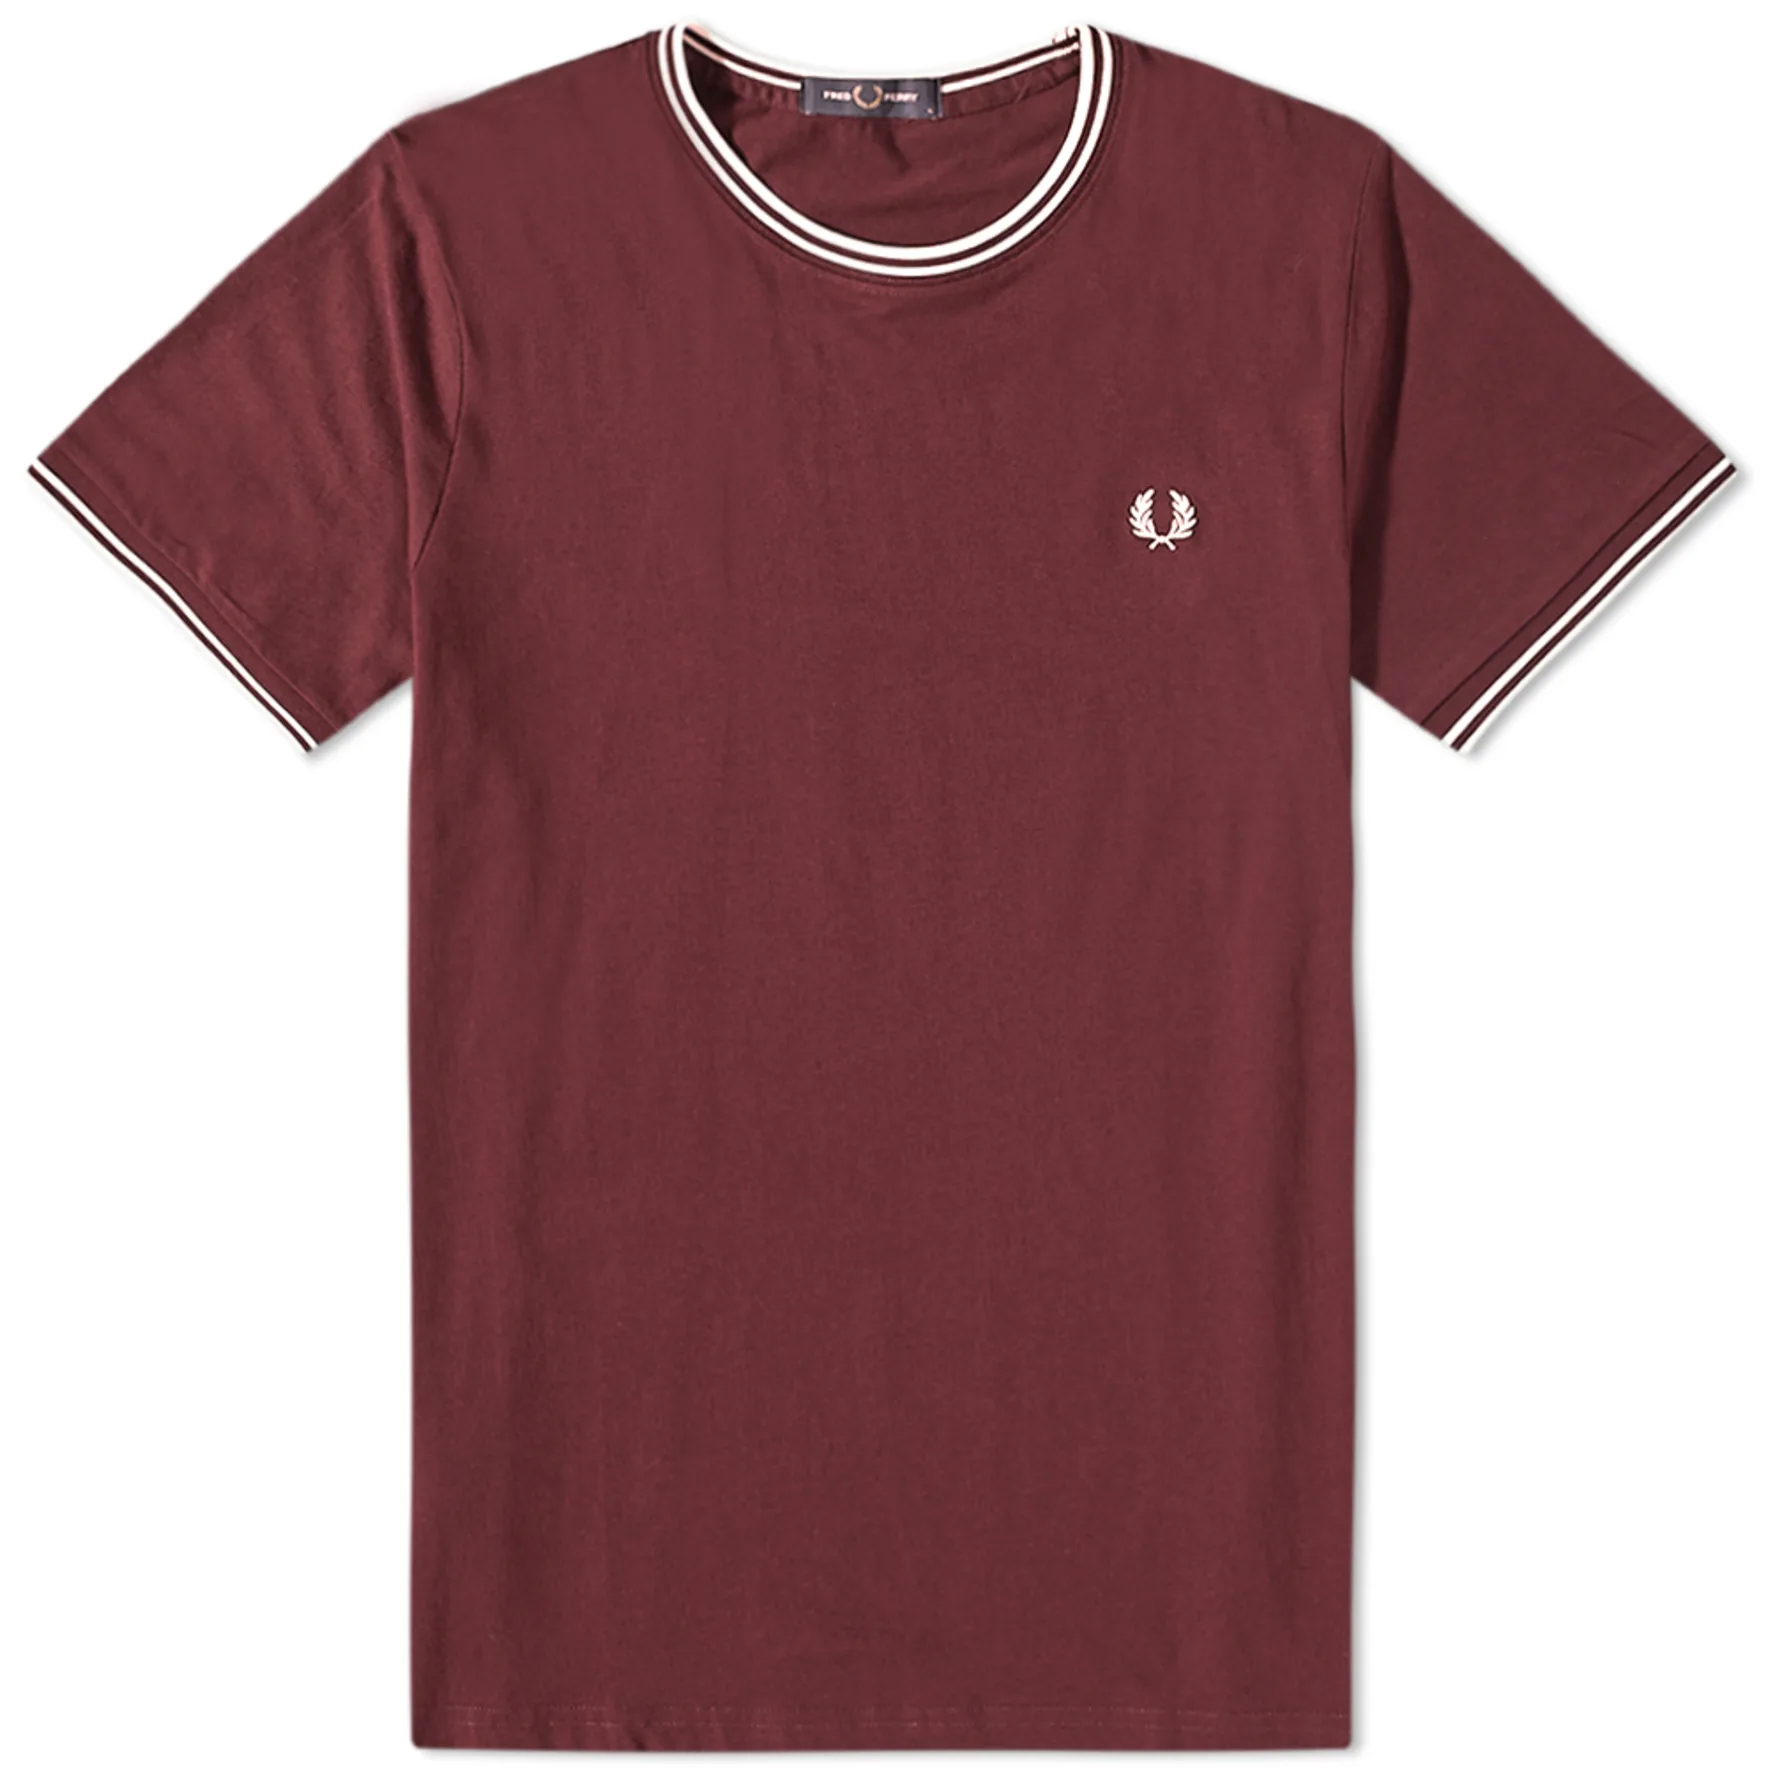 Футболка Fred Perry Authentic Twin Tipped, бордовый футболка fred perry twin tipped tee